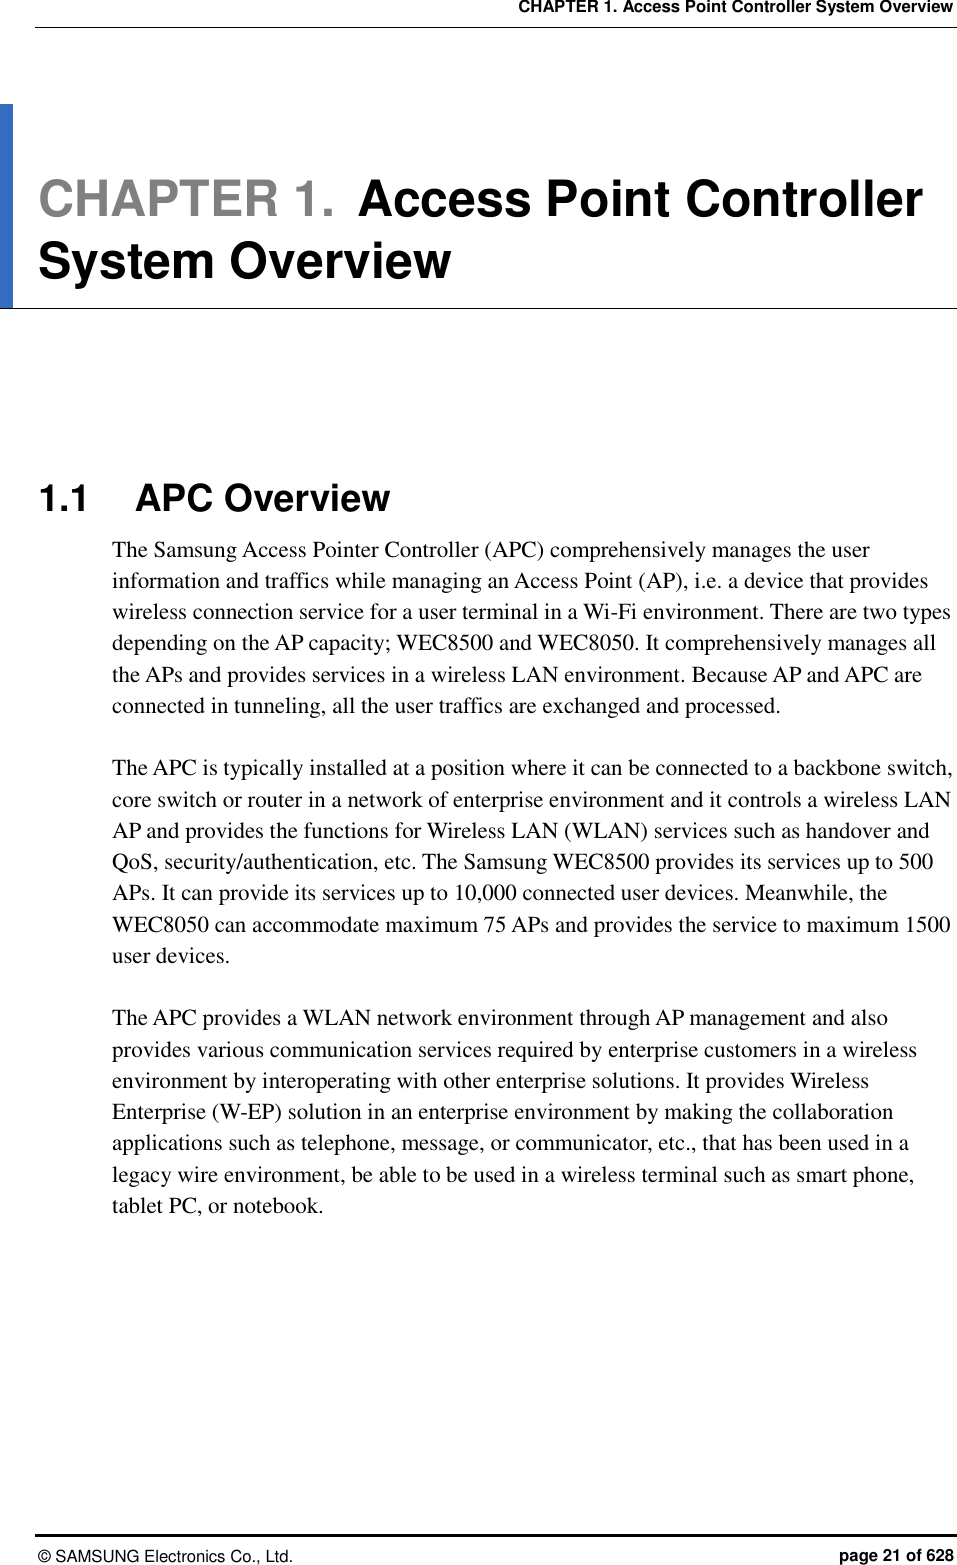 CHAPTER 1. Access Point Controller System Overview ©  SAMSUNG Electronics Co., Ltd.  page 21 of 628 CHAPTER 1. Access Point Controller System Overview      1.1  APC Overview The Samsung Access Pointer Controller (APC) comprehensively manages the user information and traffics while managing an Access Point (AP), i.e. a device that provides wireless connection service for a user terminal in a Wi-Fi environment. There are two types depending on the AP capacity; WEC8500 and WEC8050. It comprehensively manages all the APs and provides services in a wireless LAN environment. Because AP and APC are connected in tunneling, all the user traffics are exchanged and processed.    The APC is typically installed at a position where it can be connected to a backbone switch, core switch or router in a network of enterprise environment and it controls a wireless LAN AP and provides the functions for Wireless LAN (WLAN) services such as handover and QoS, security/authentication, etc. The Samsung WEC8500 provides its services up to 500 APs. It can provide its services up to 10,000 connected user devices. Meanwhile, the WEC8050 can accommodate maximum 75 APs and provides the service to maximum 1500 user devices.  The APC provides a WLAN network environment through AP management and also provides various communication services required by enterprise customers in a wireless environment by interoperating with other enterprise solutions. It provides Wireless Enterprise (W-EP) solution in an enterprise environment by making the collaboration applications such as telephone, message, or communicator, etc., that has been used in a legacy wire environment, be able to be used in a wireless terminal such as smart phone, tablet PC, or notebook.  